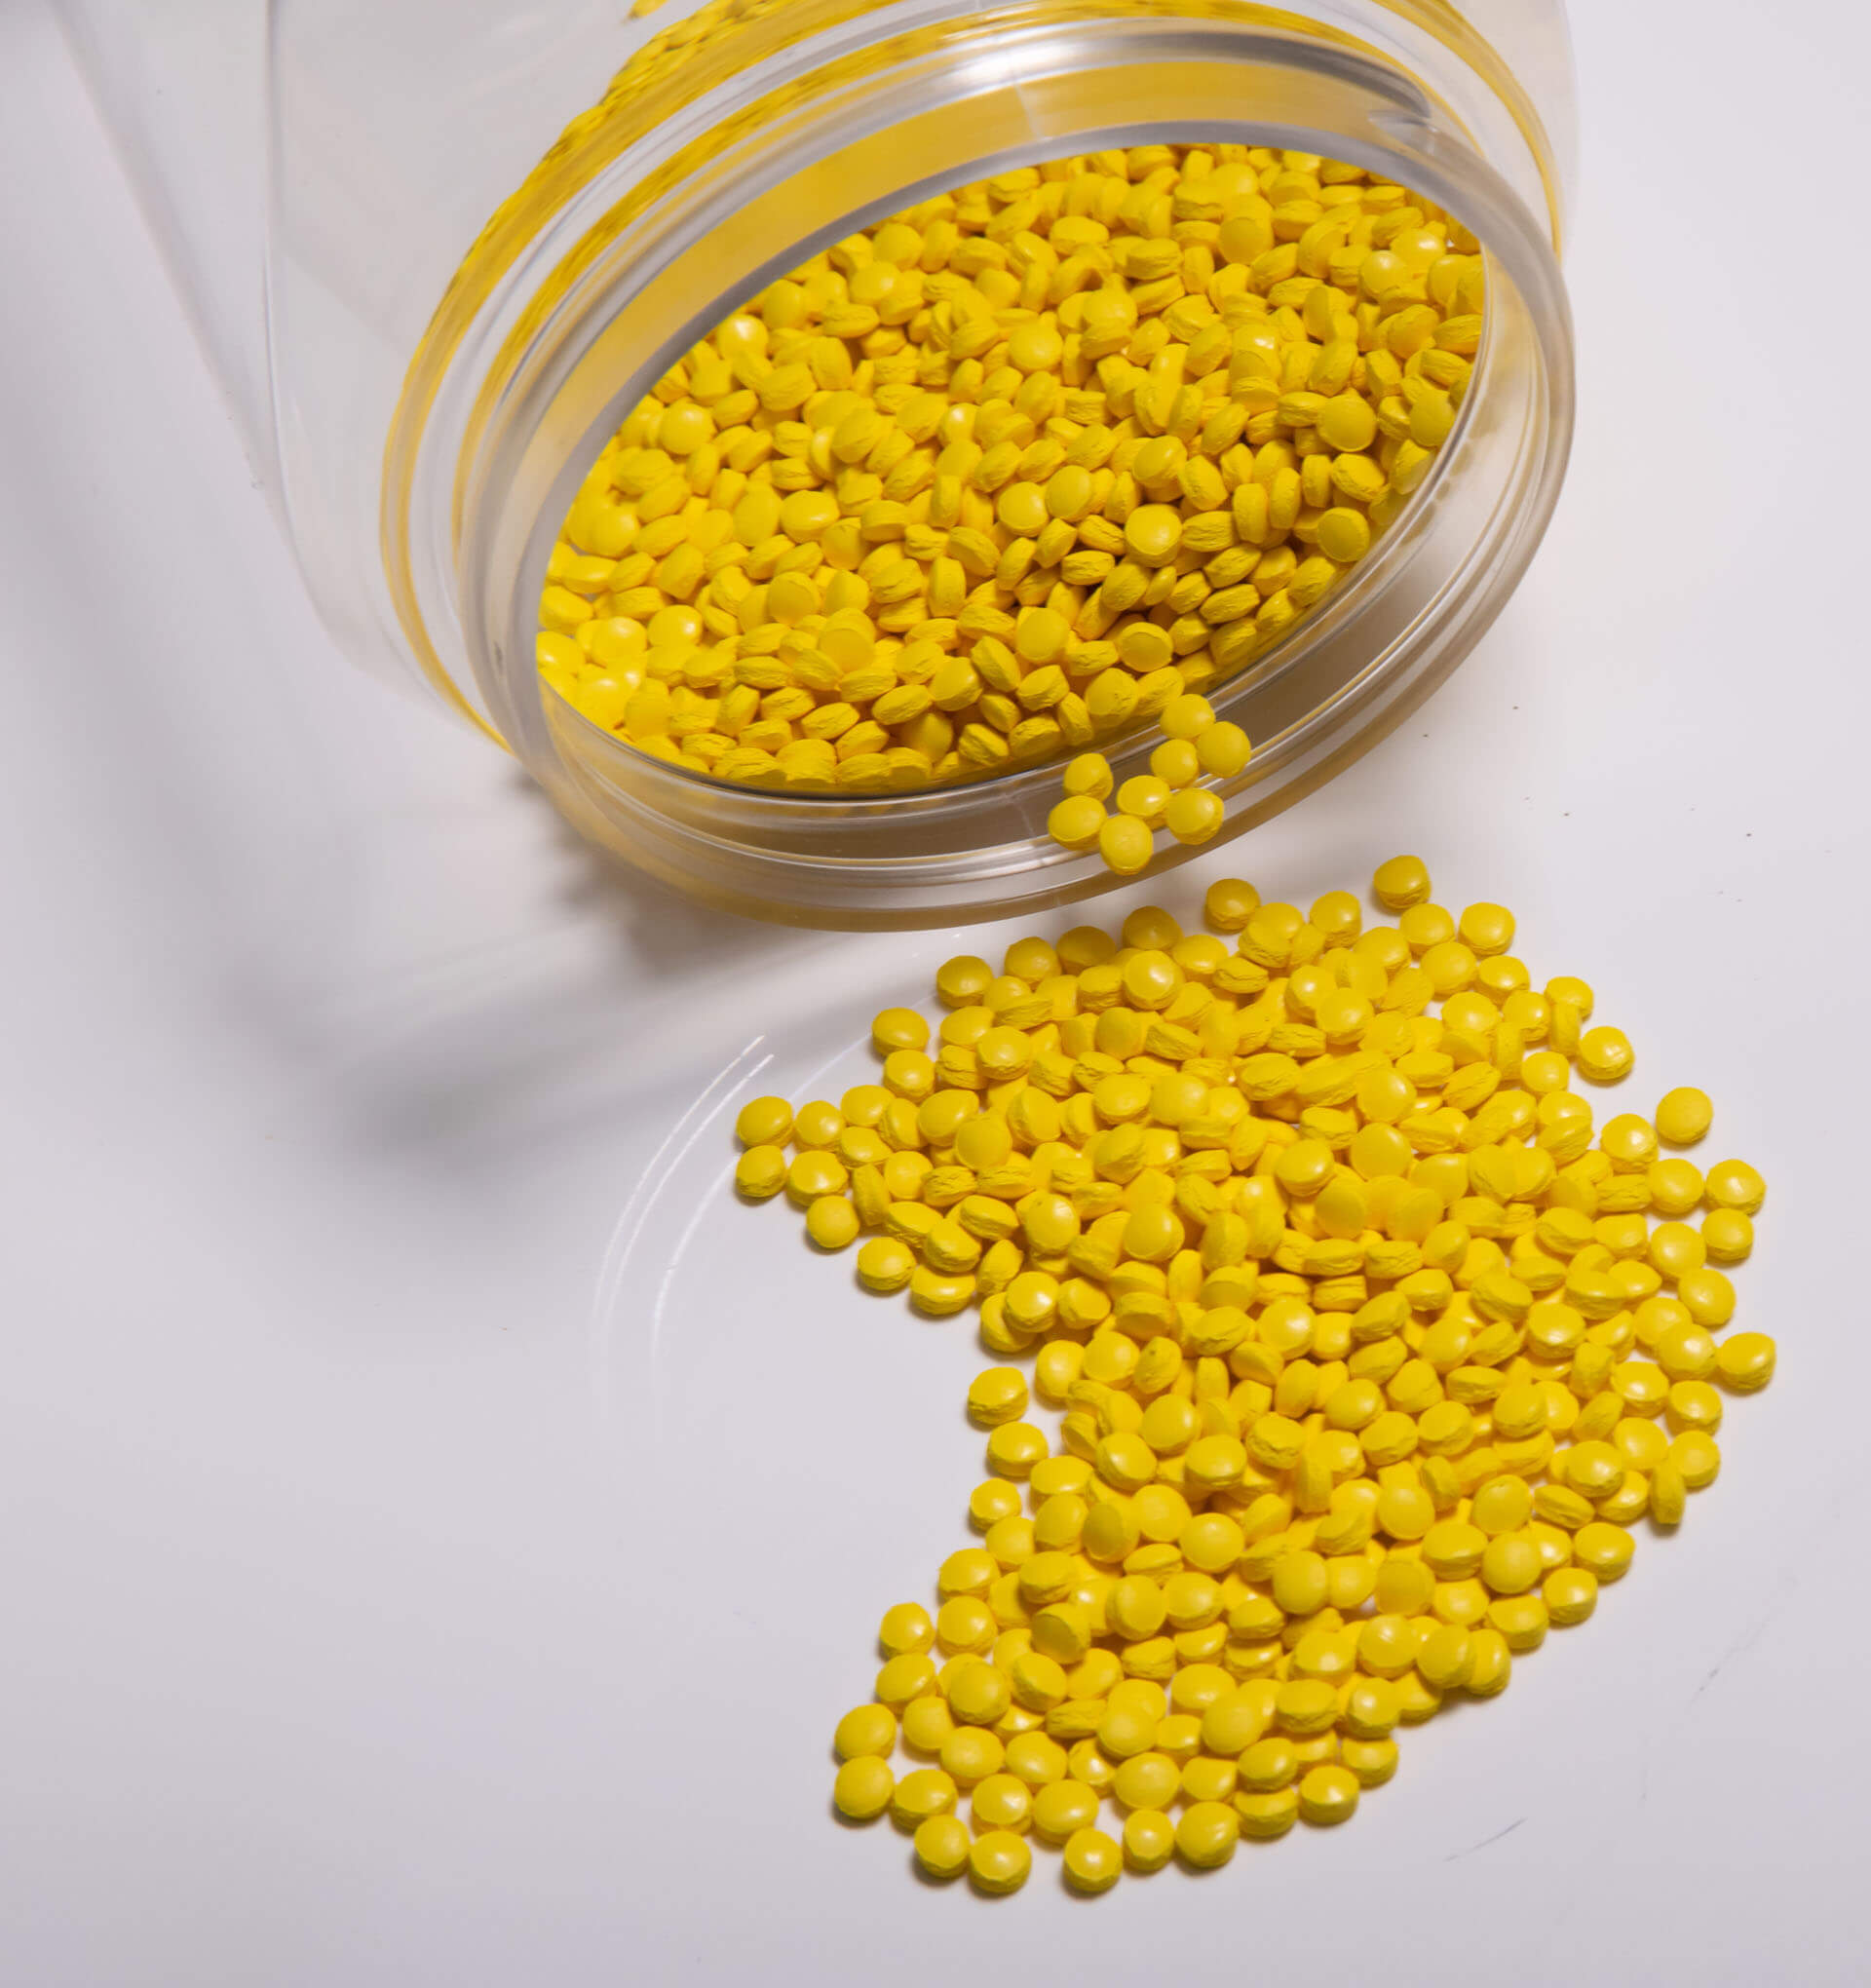 pile of injection molding resin pellets that is yellow